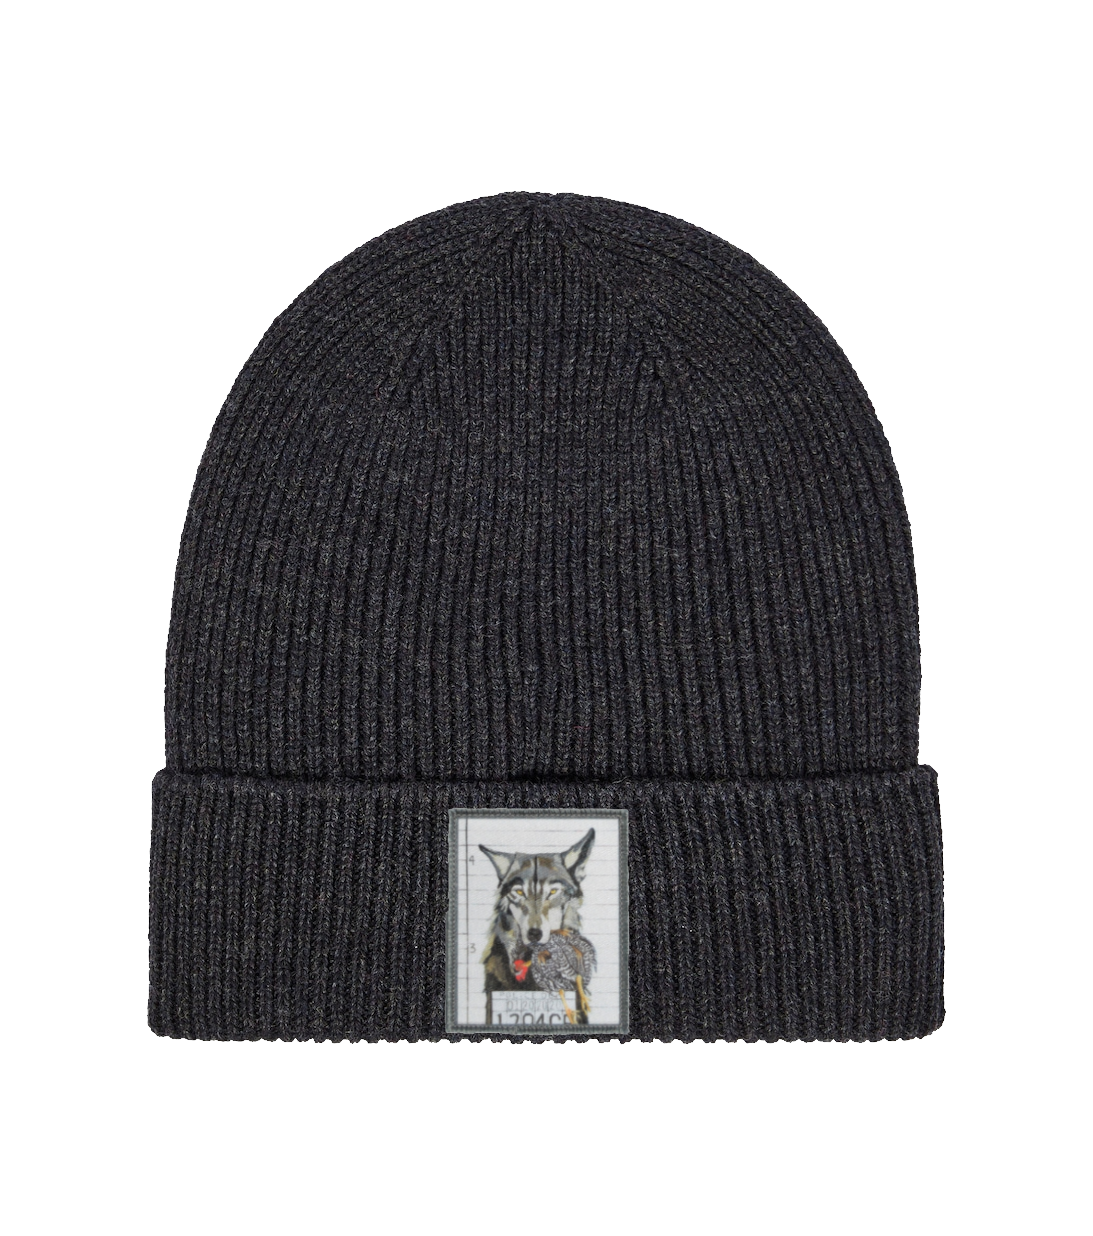 Merino Wool Beanie Charcoal Hats FlynHats The Usual Suspects: Wolf  